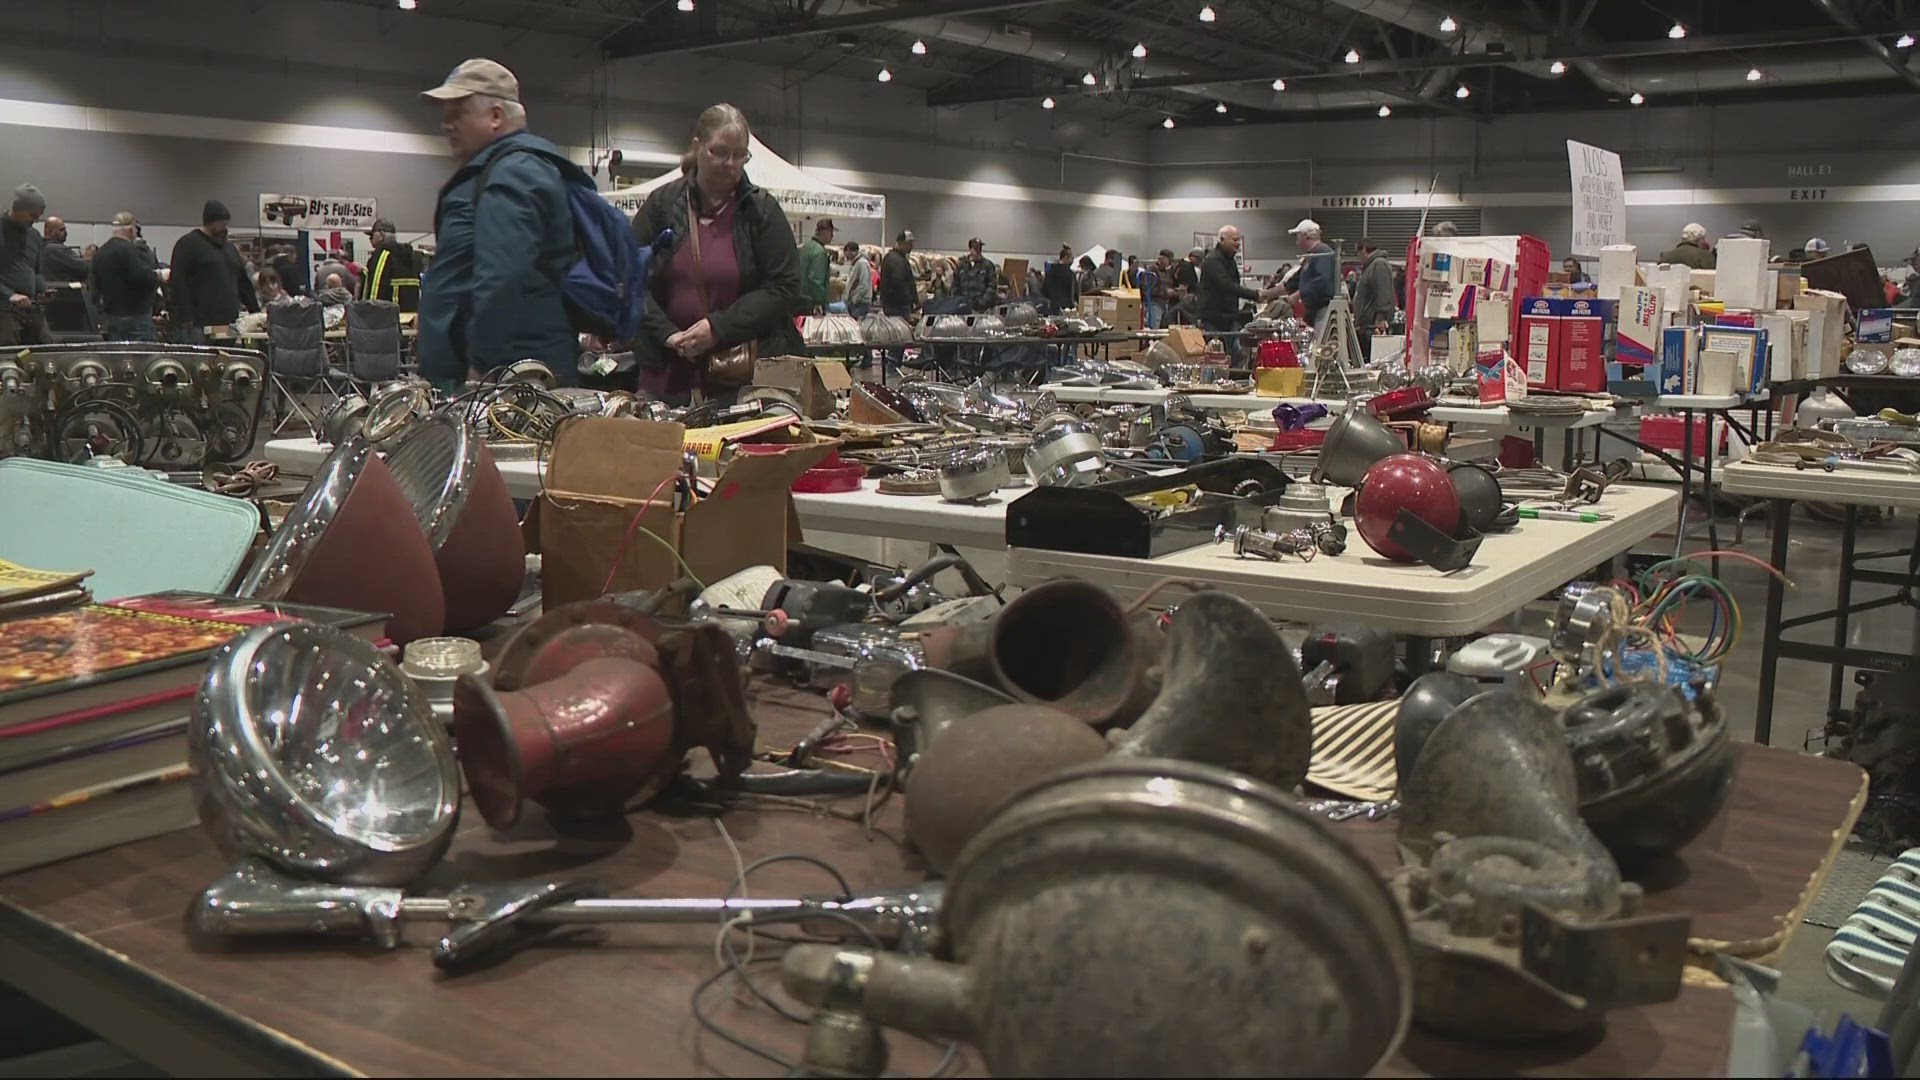 The 58th Portland Auto Swap Meet at Portland Expo Center has been going on since 1964.